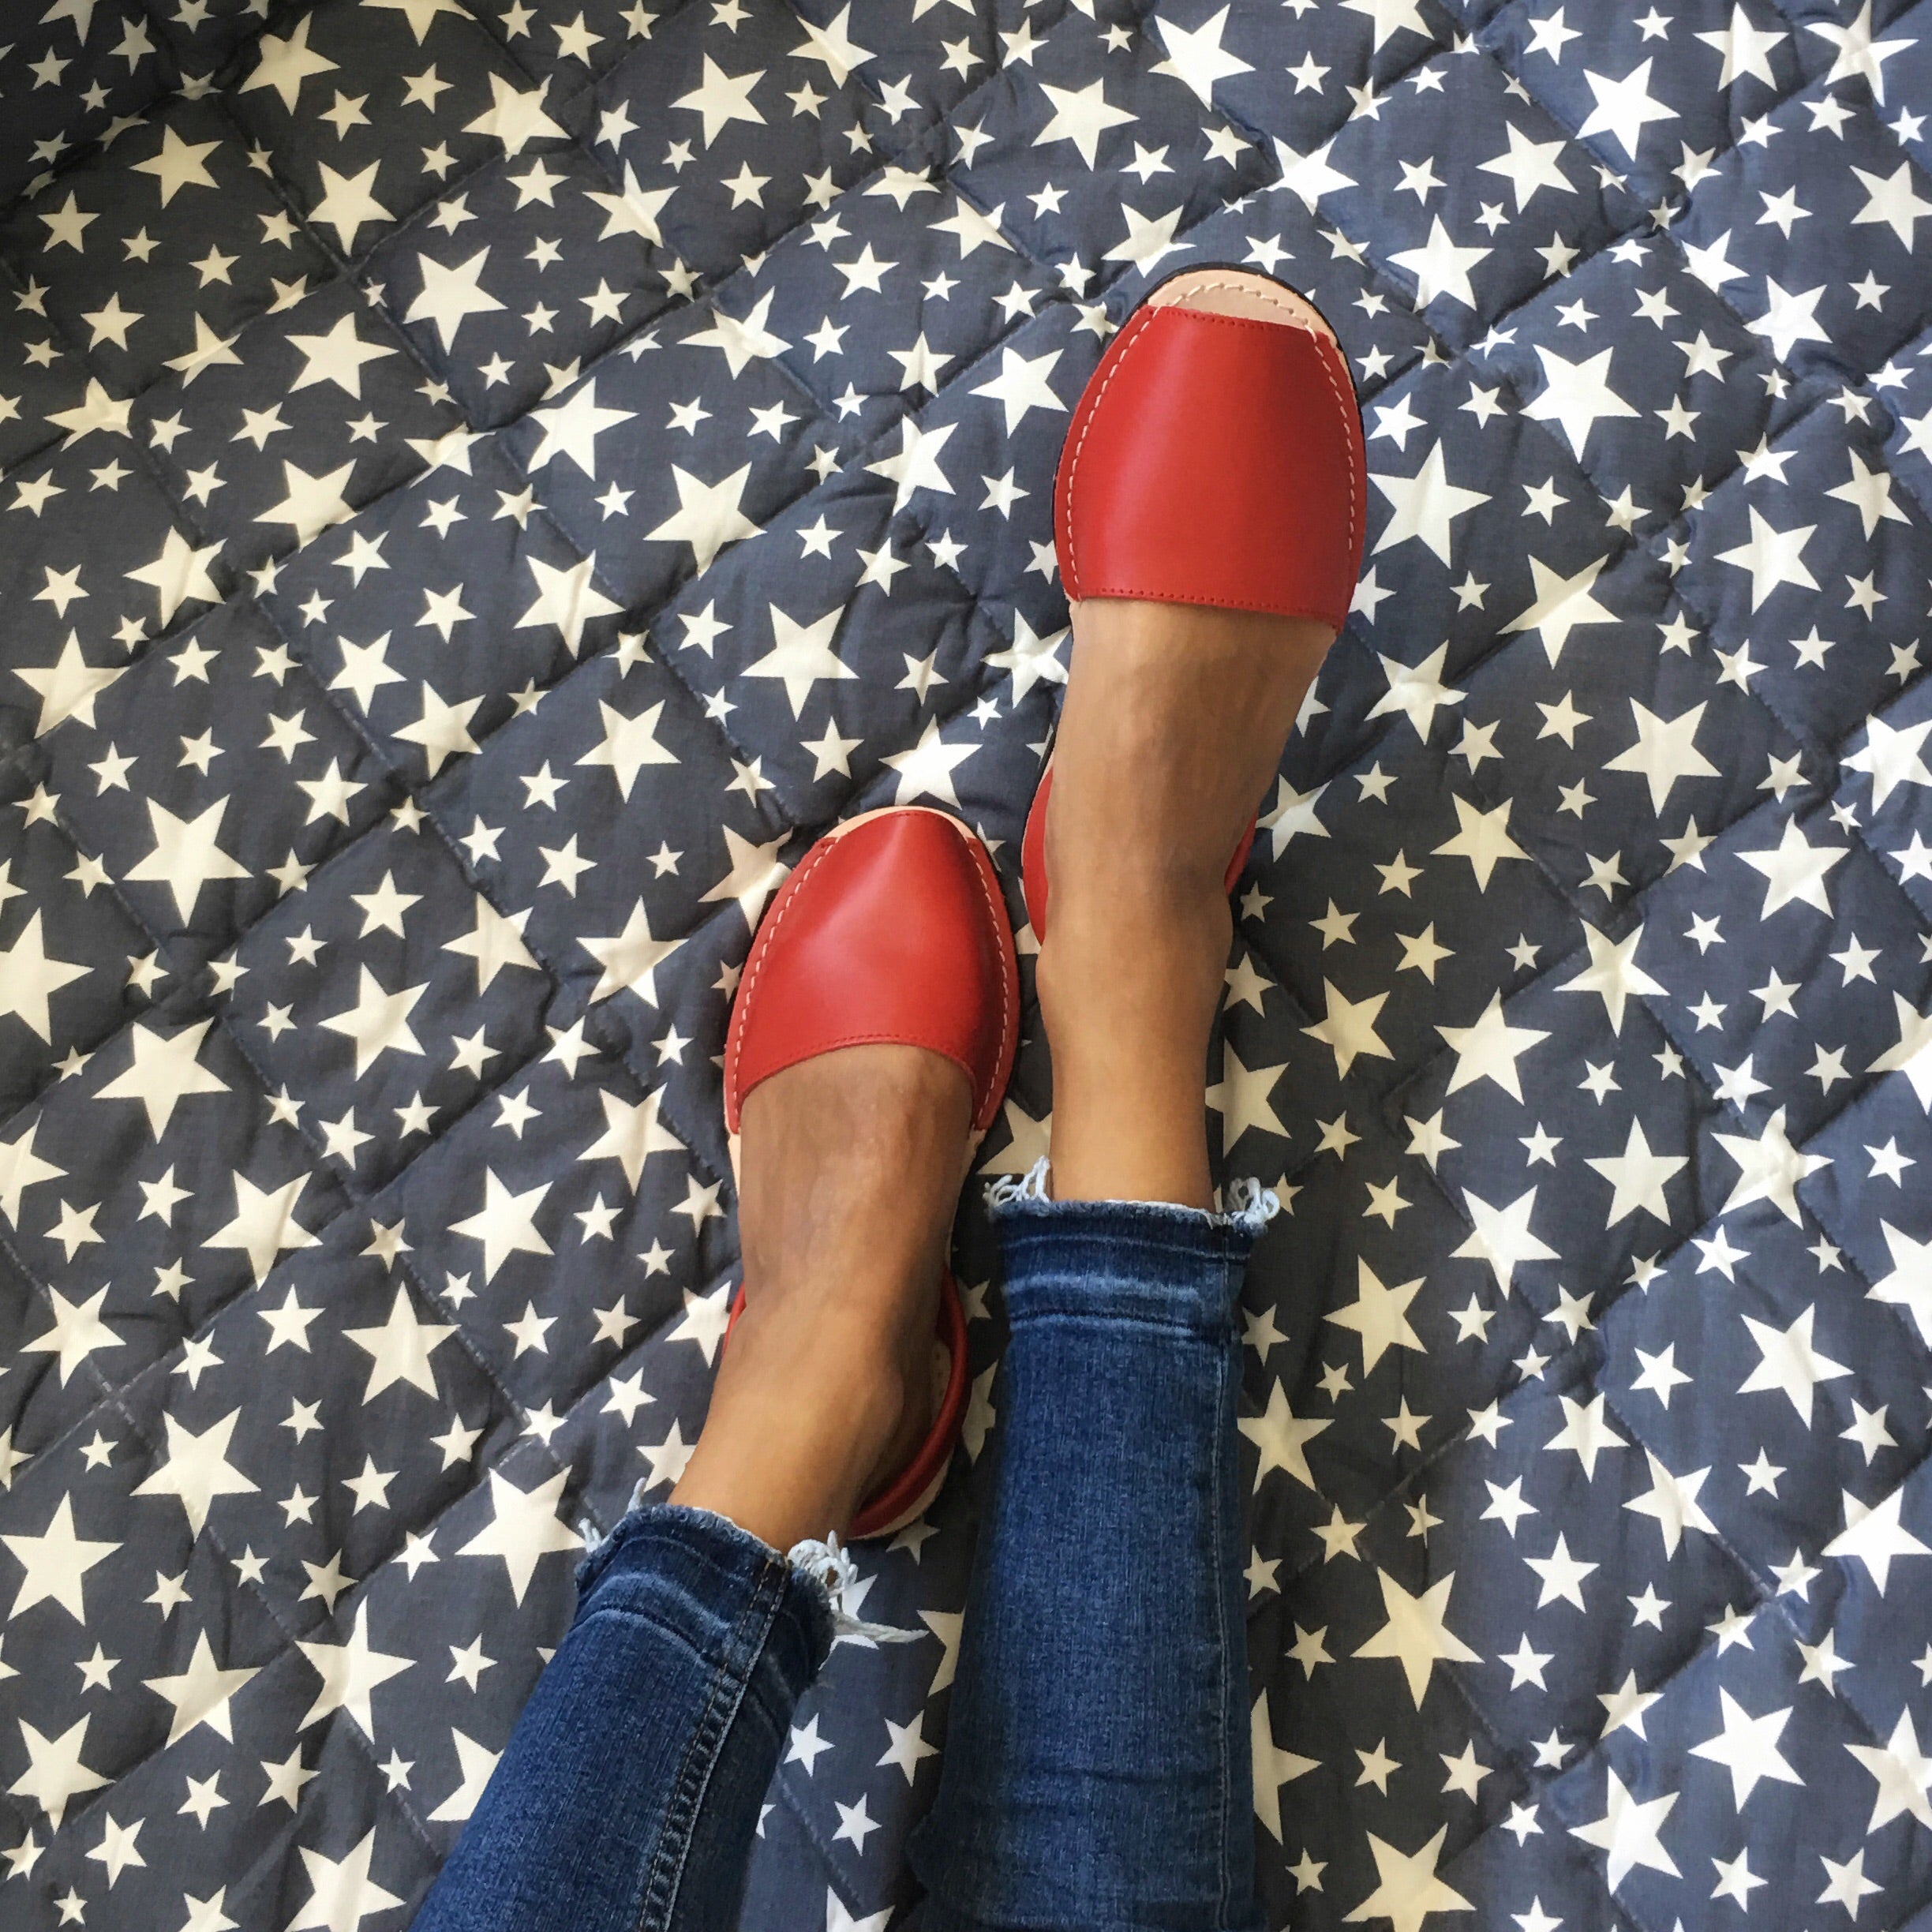 Classic red sandals  with blue jeans - instagram